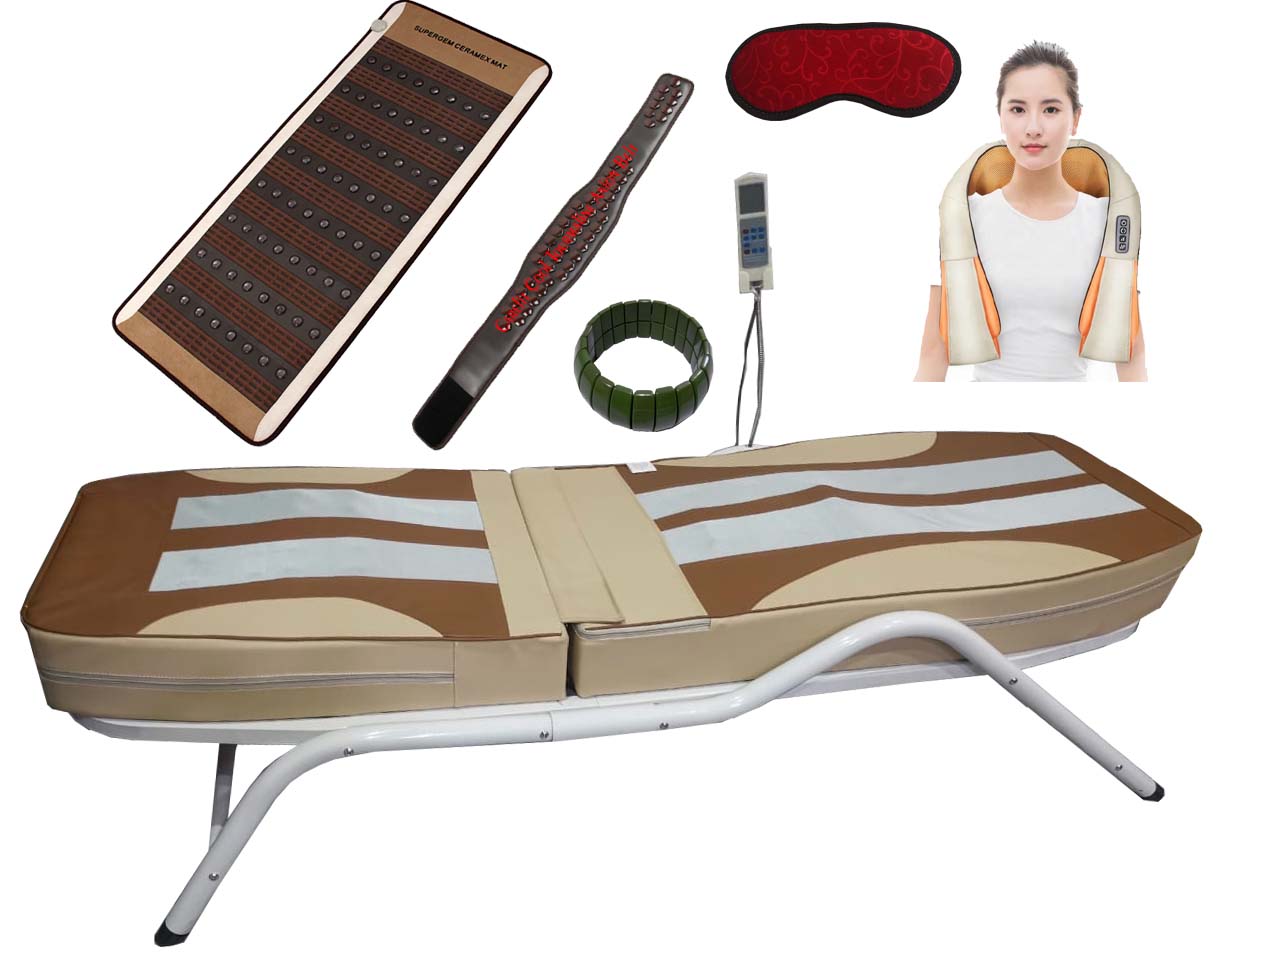 Jade Automatic Full Body Thermal Massage Bed Carefit 4500m